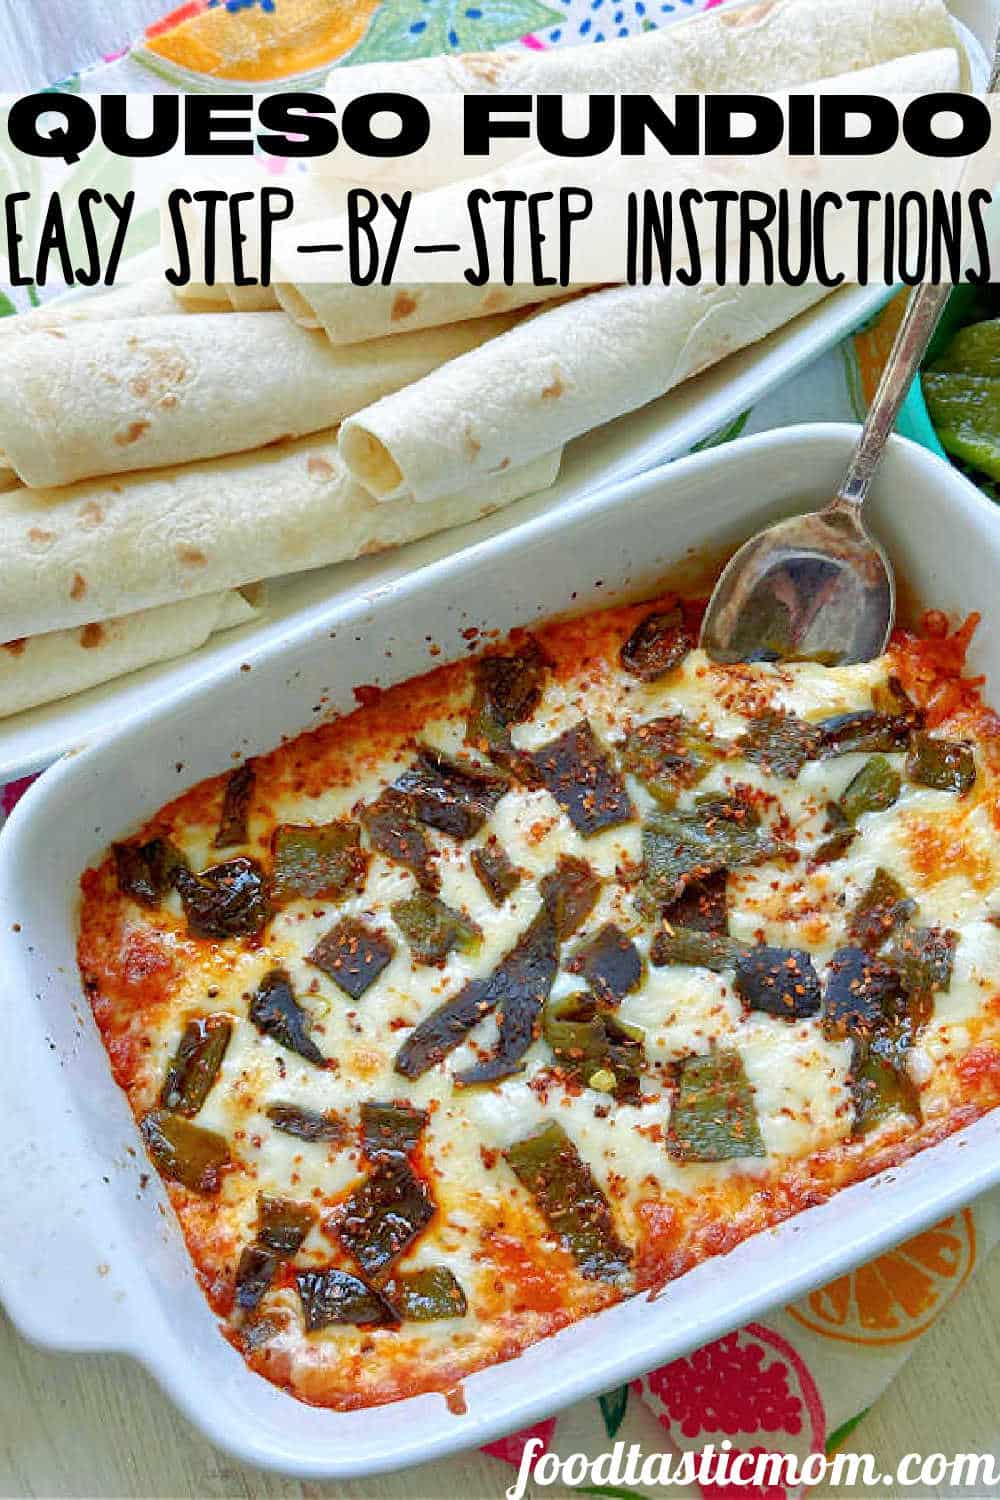 The easiest and best tasting Queso Fundido! Copycat restaurant recipe.